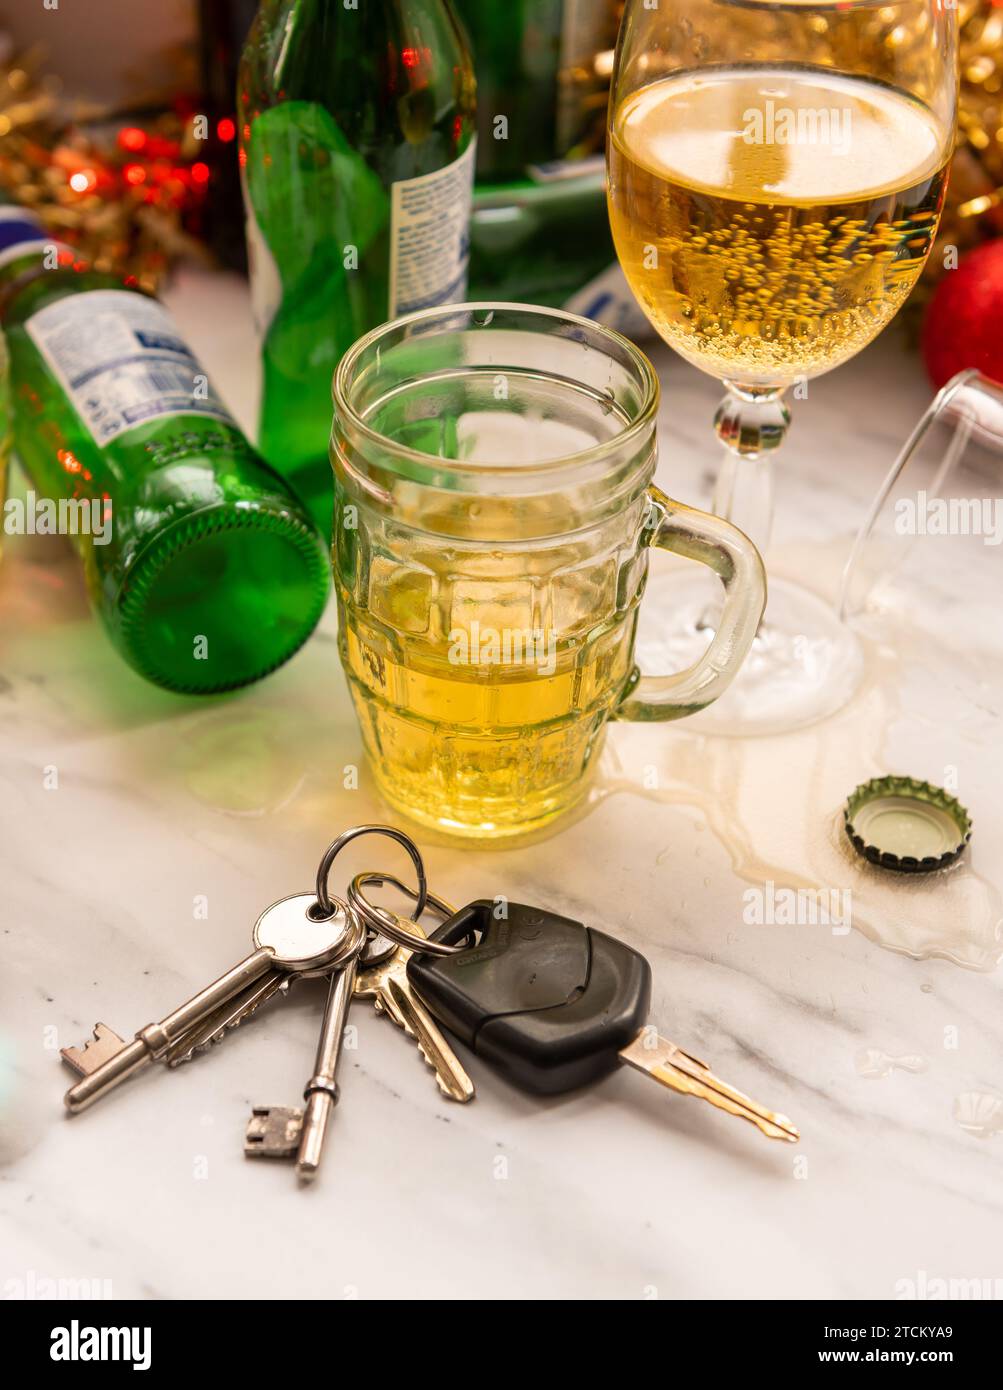 A Christmas, festive drink driving concept with a set of car keys on a table full of alcoholic drinks and decorations. Stock Photo